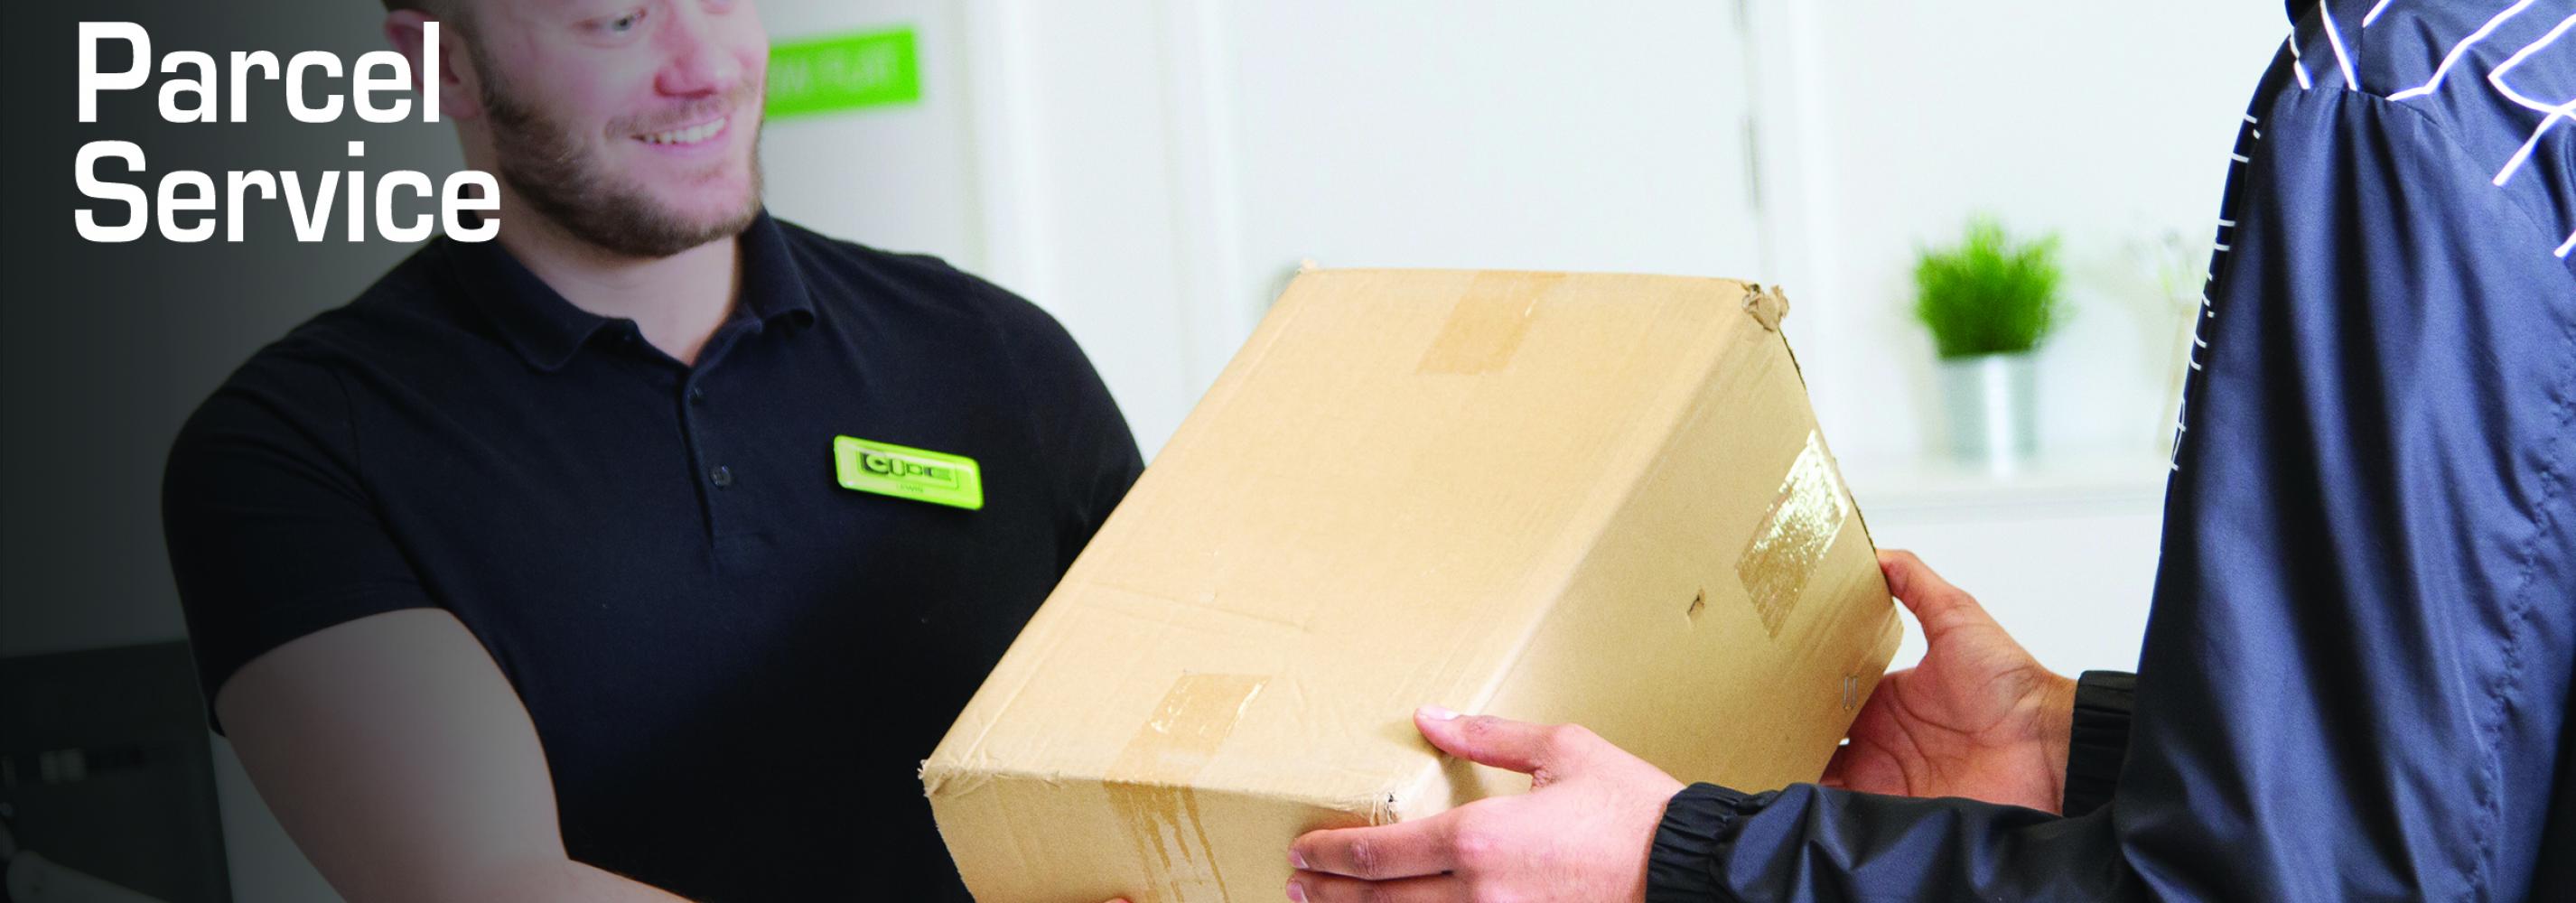 Get your orders delivered and collect from our parcel service